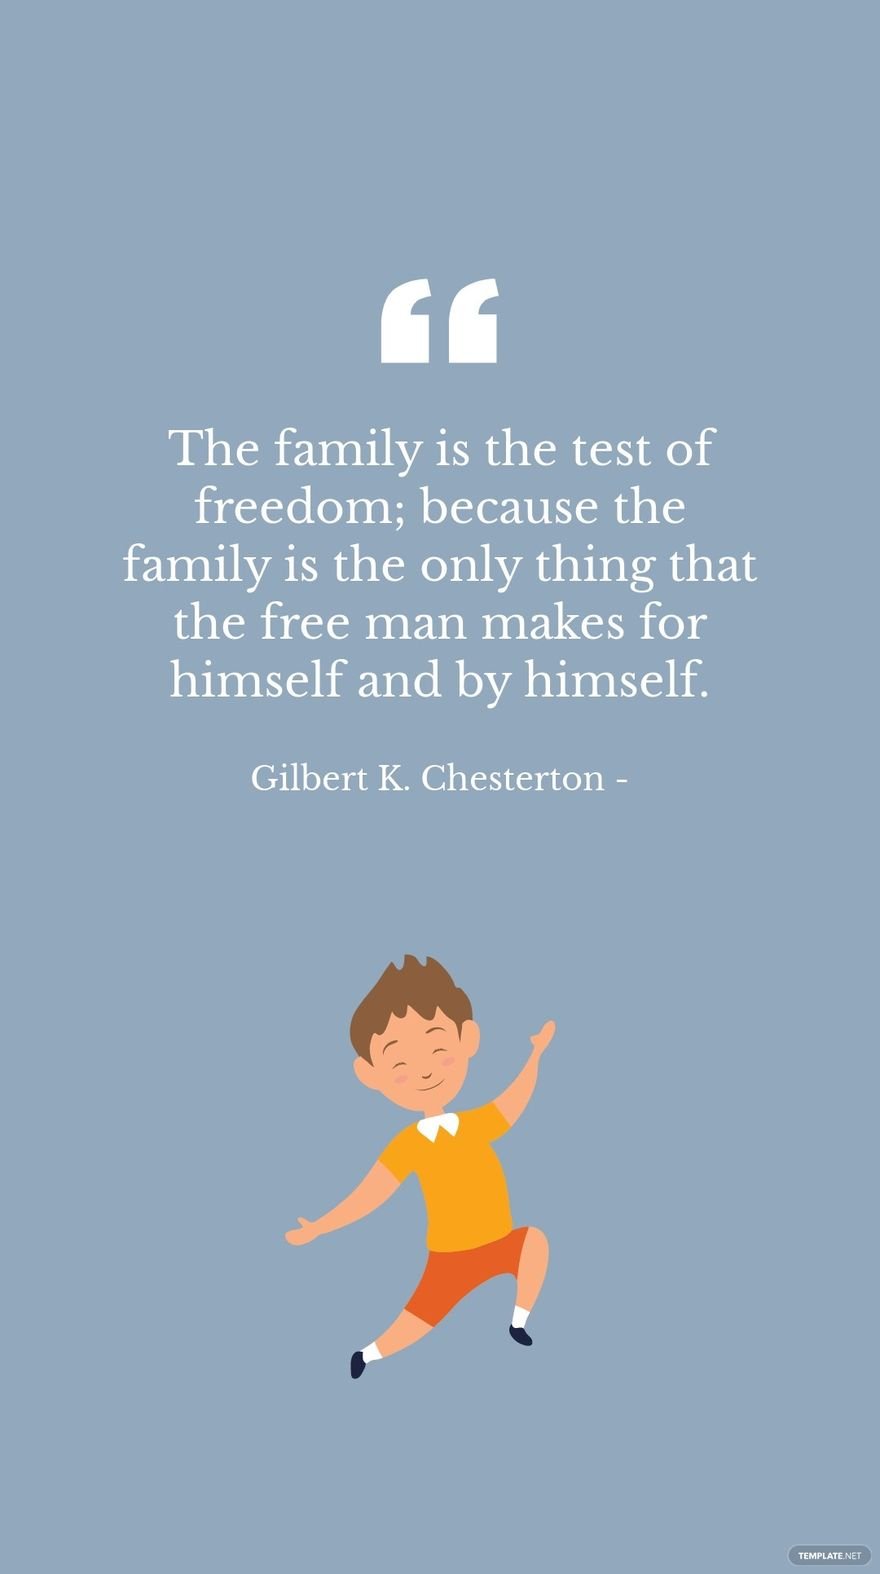 Gilbert K. Chesterton - The family is the test of freedom; because the family is the only thing that the free man makes for himself and by himself.